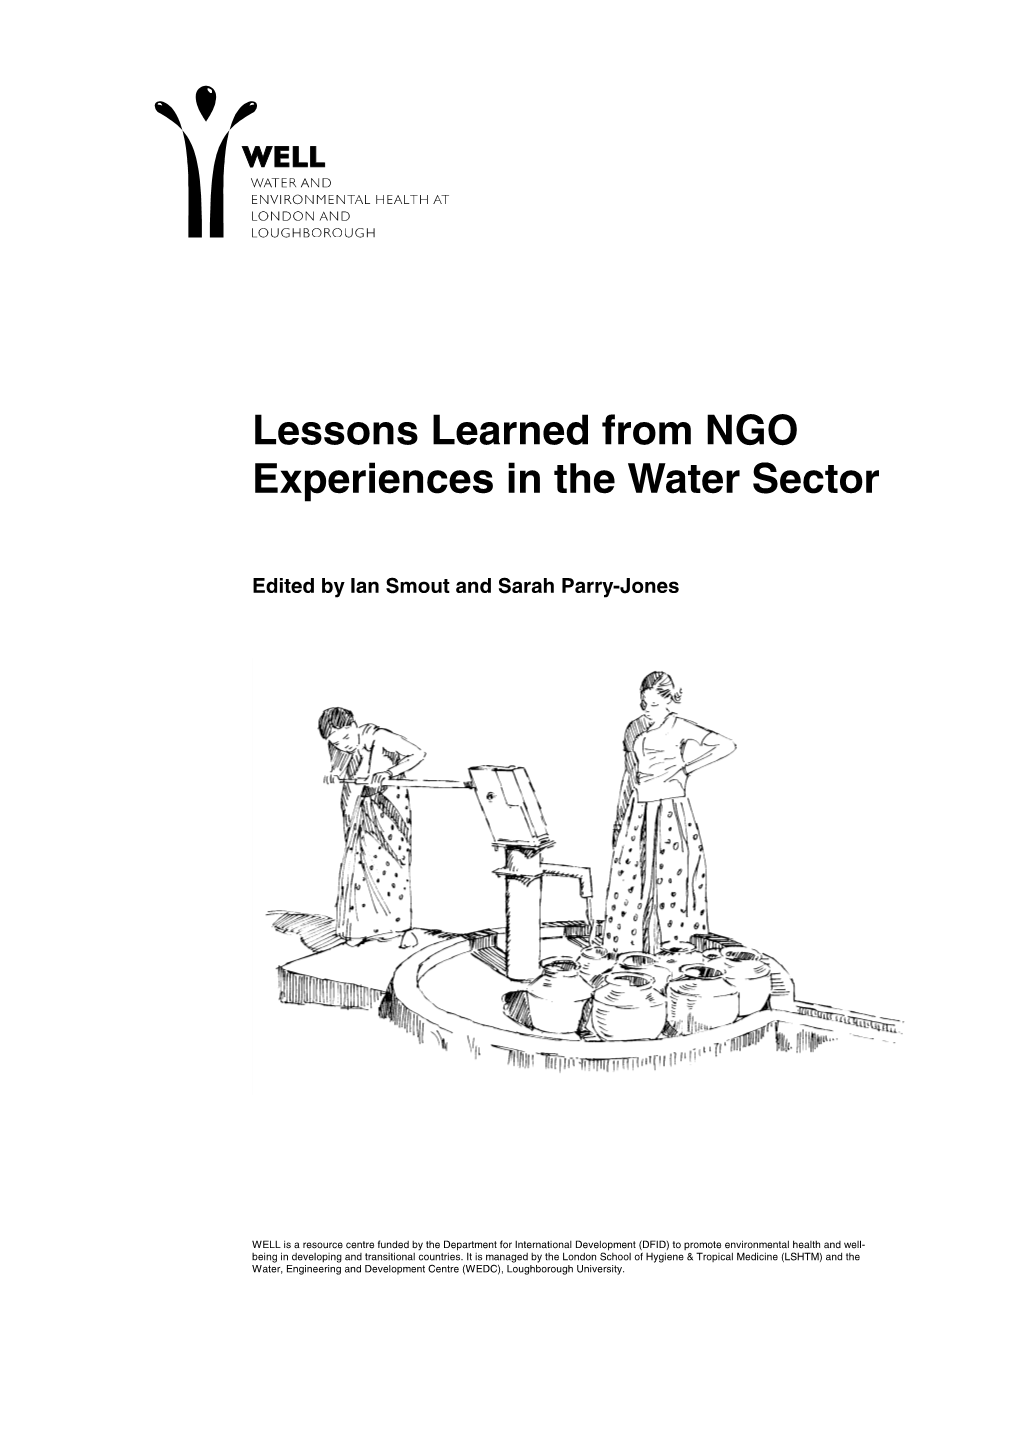 Lessons Learned from NGO Experiences in the Water Sector